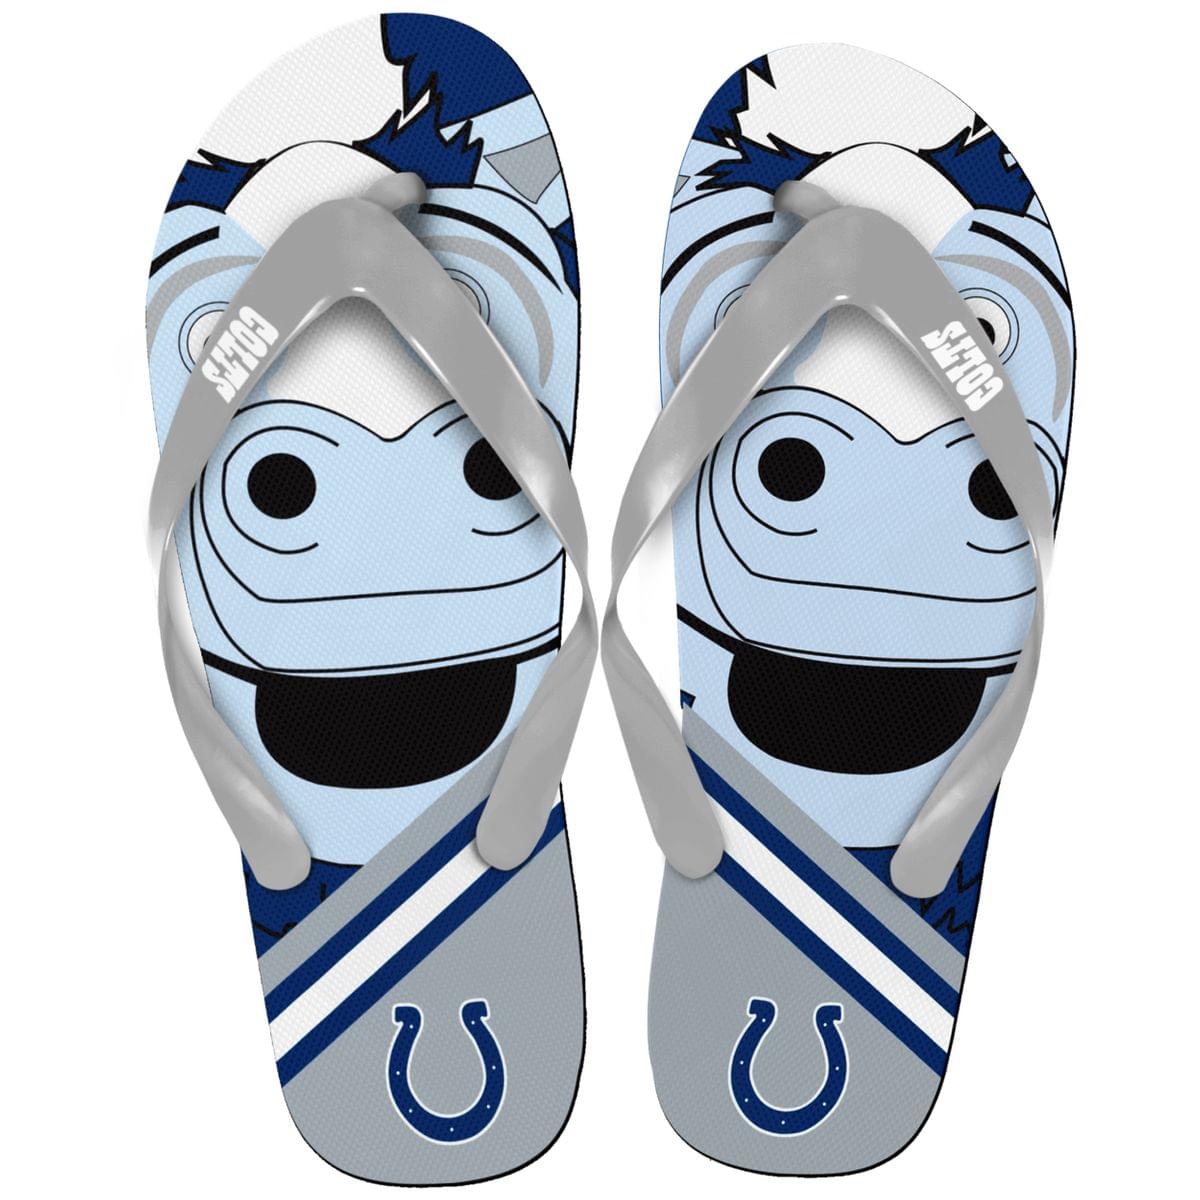 Indianapolis Colts NFL 8-16 Youth Mascot Flip Flops